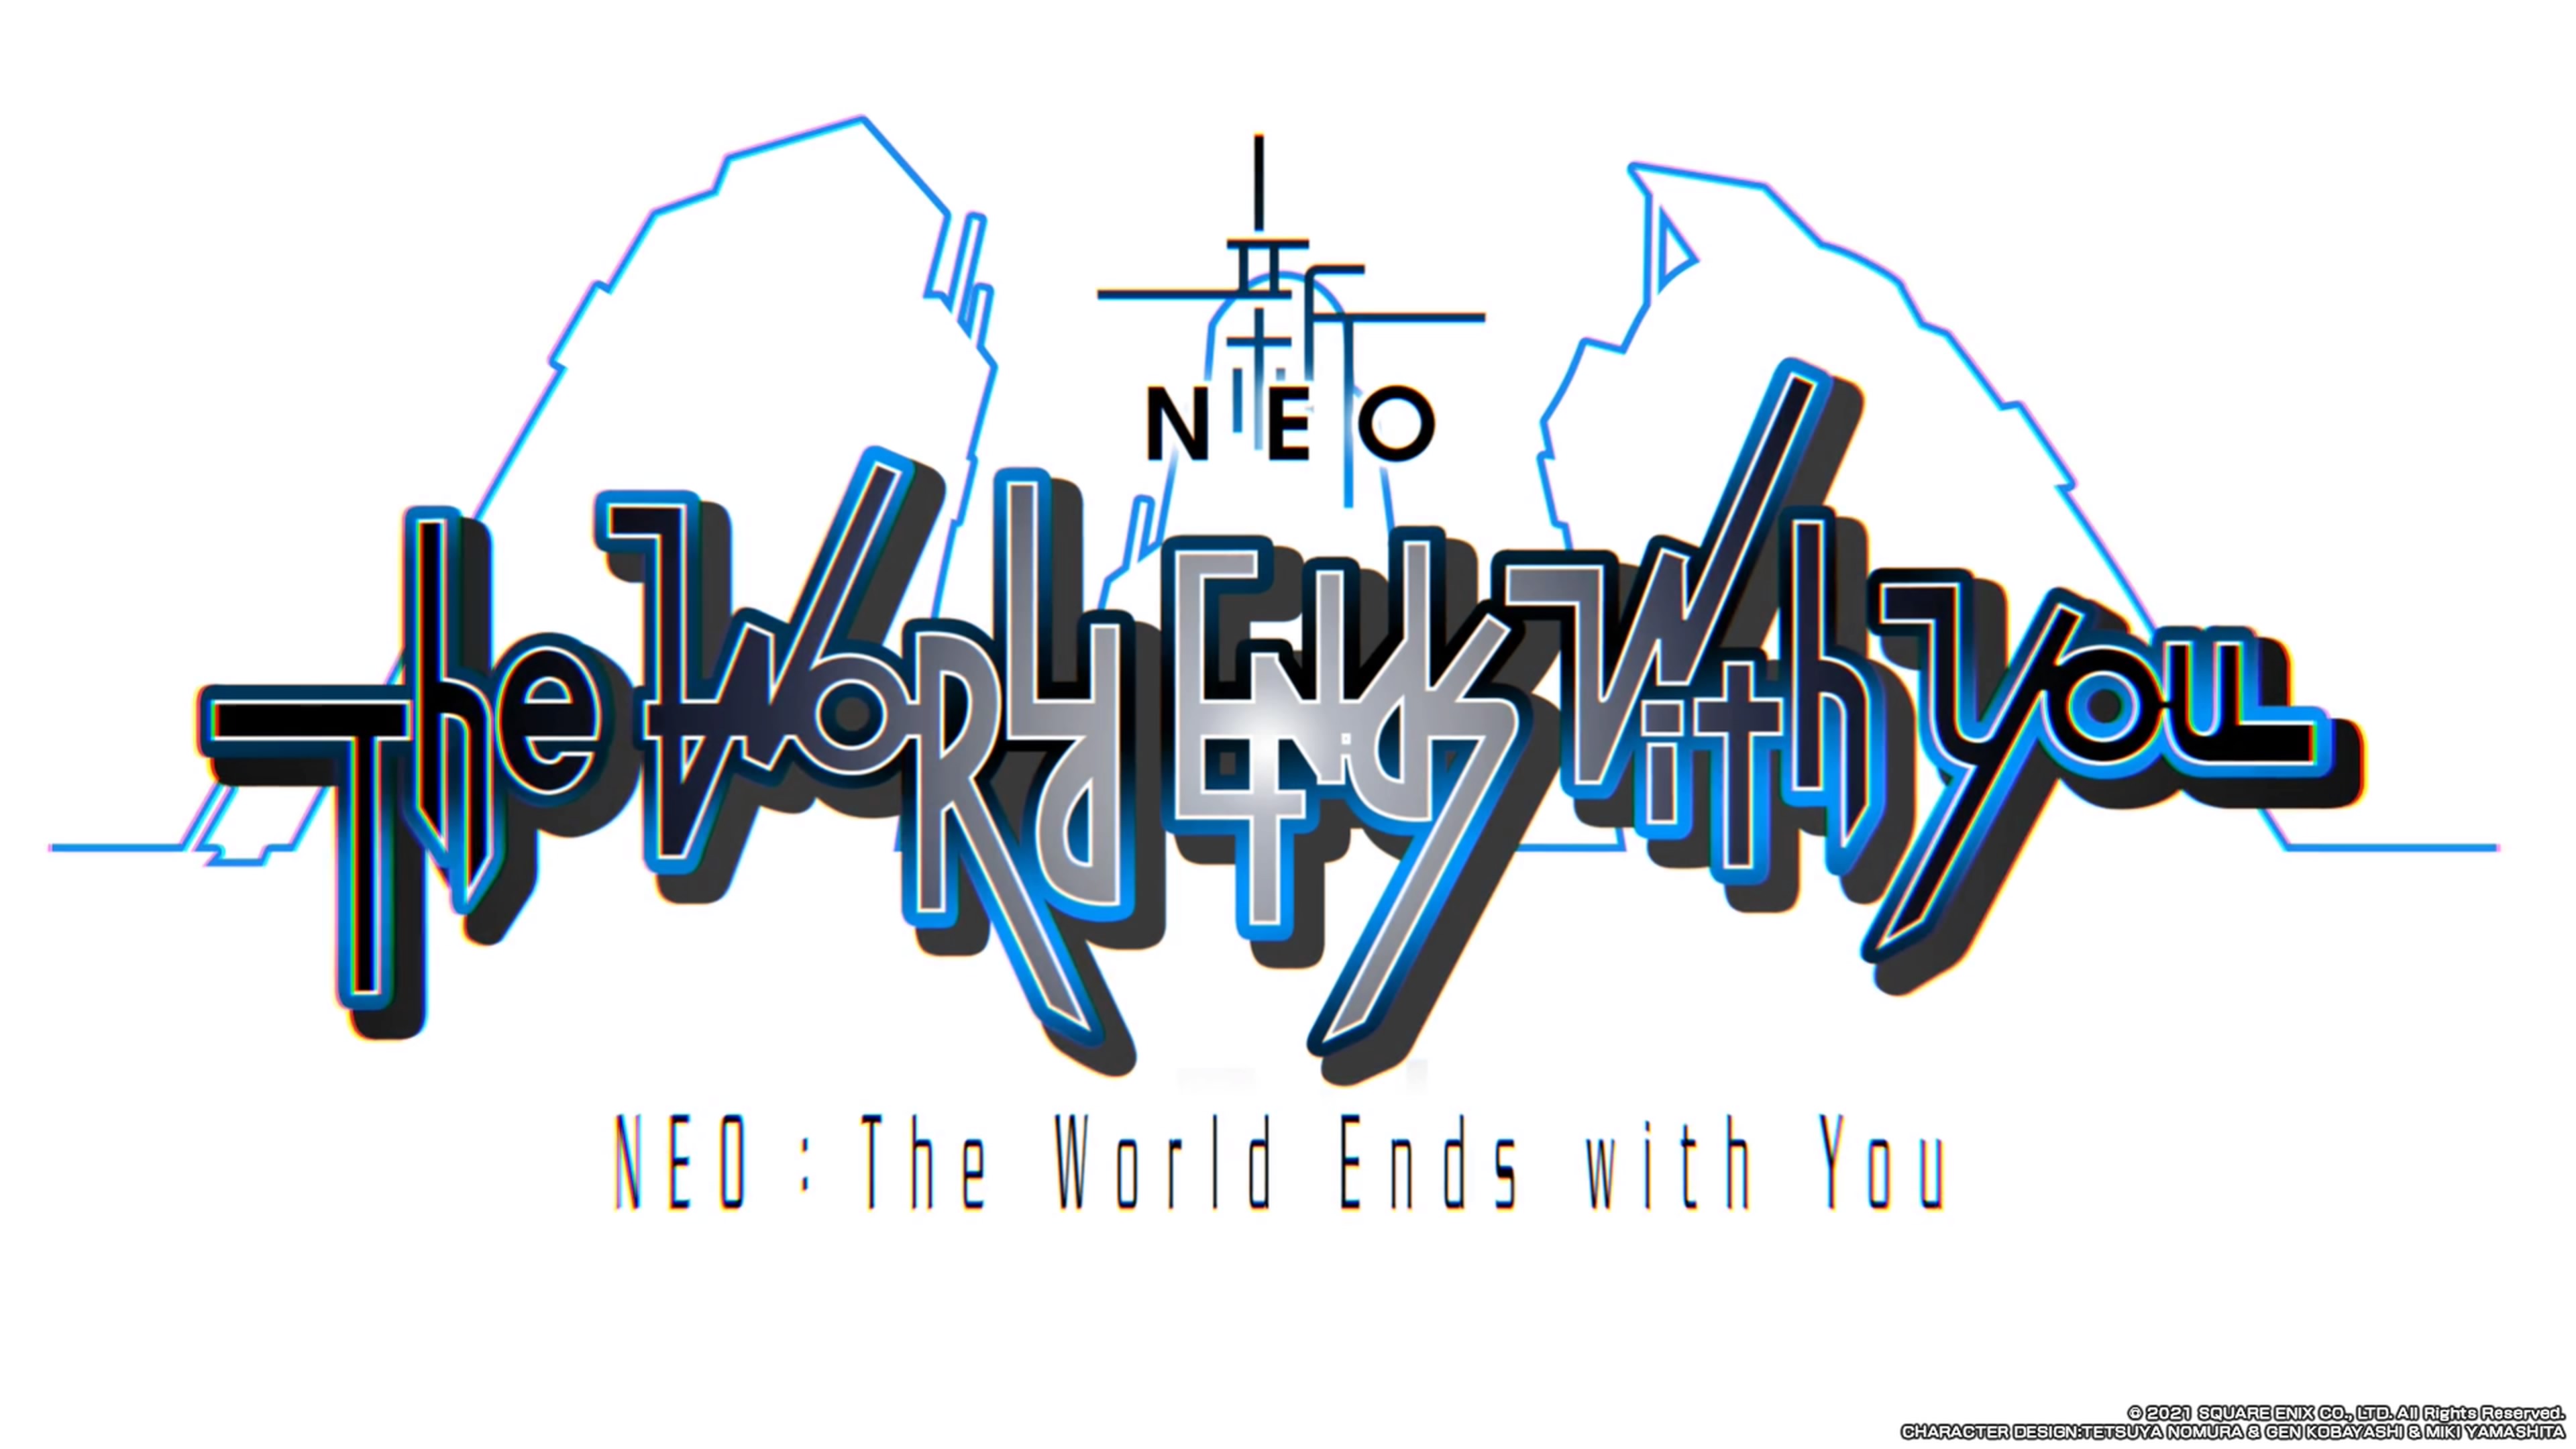 Neo The World Ends With You PS4 Review #49